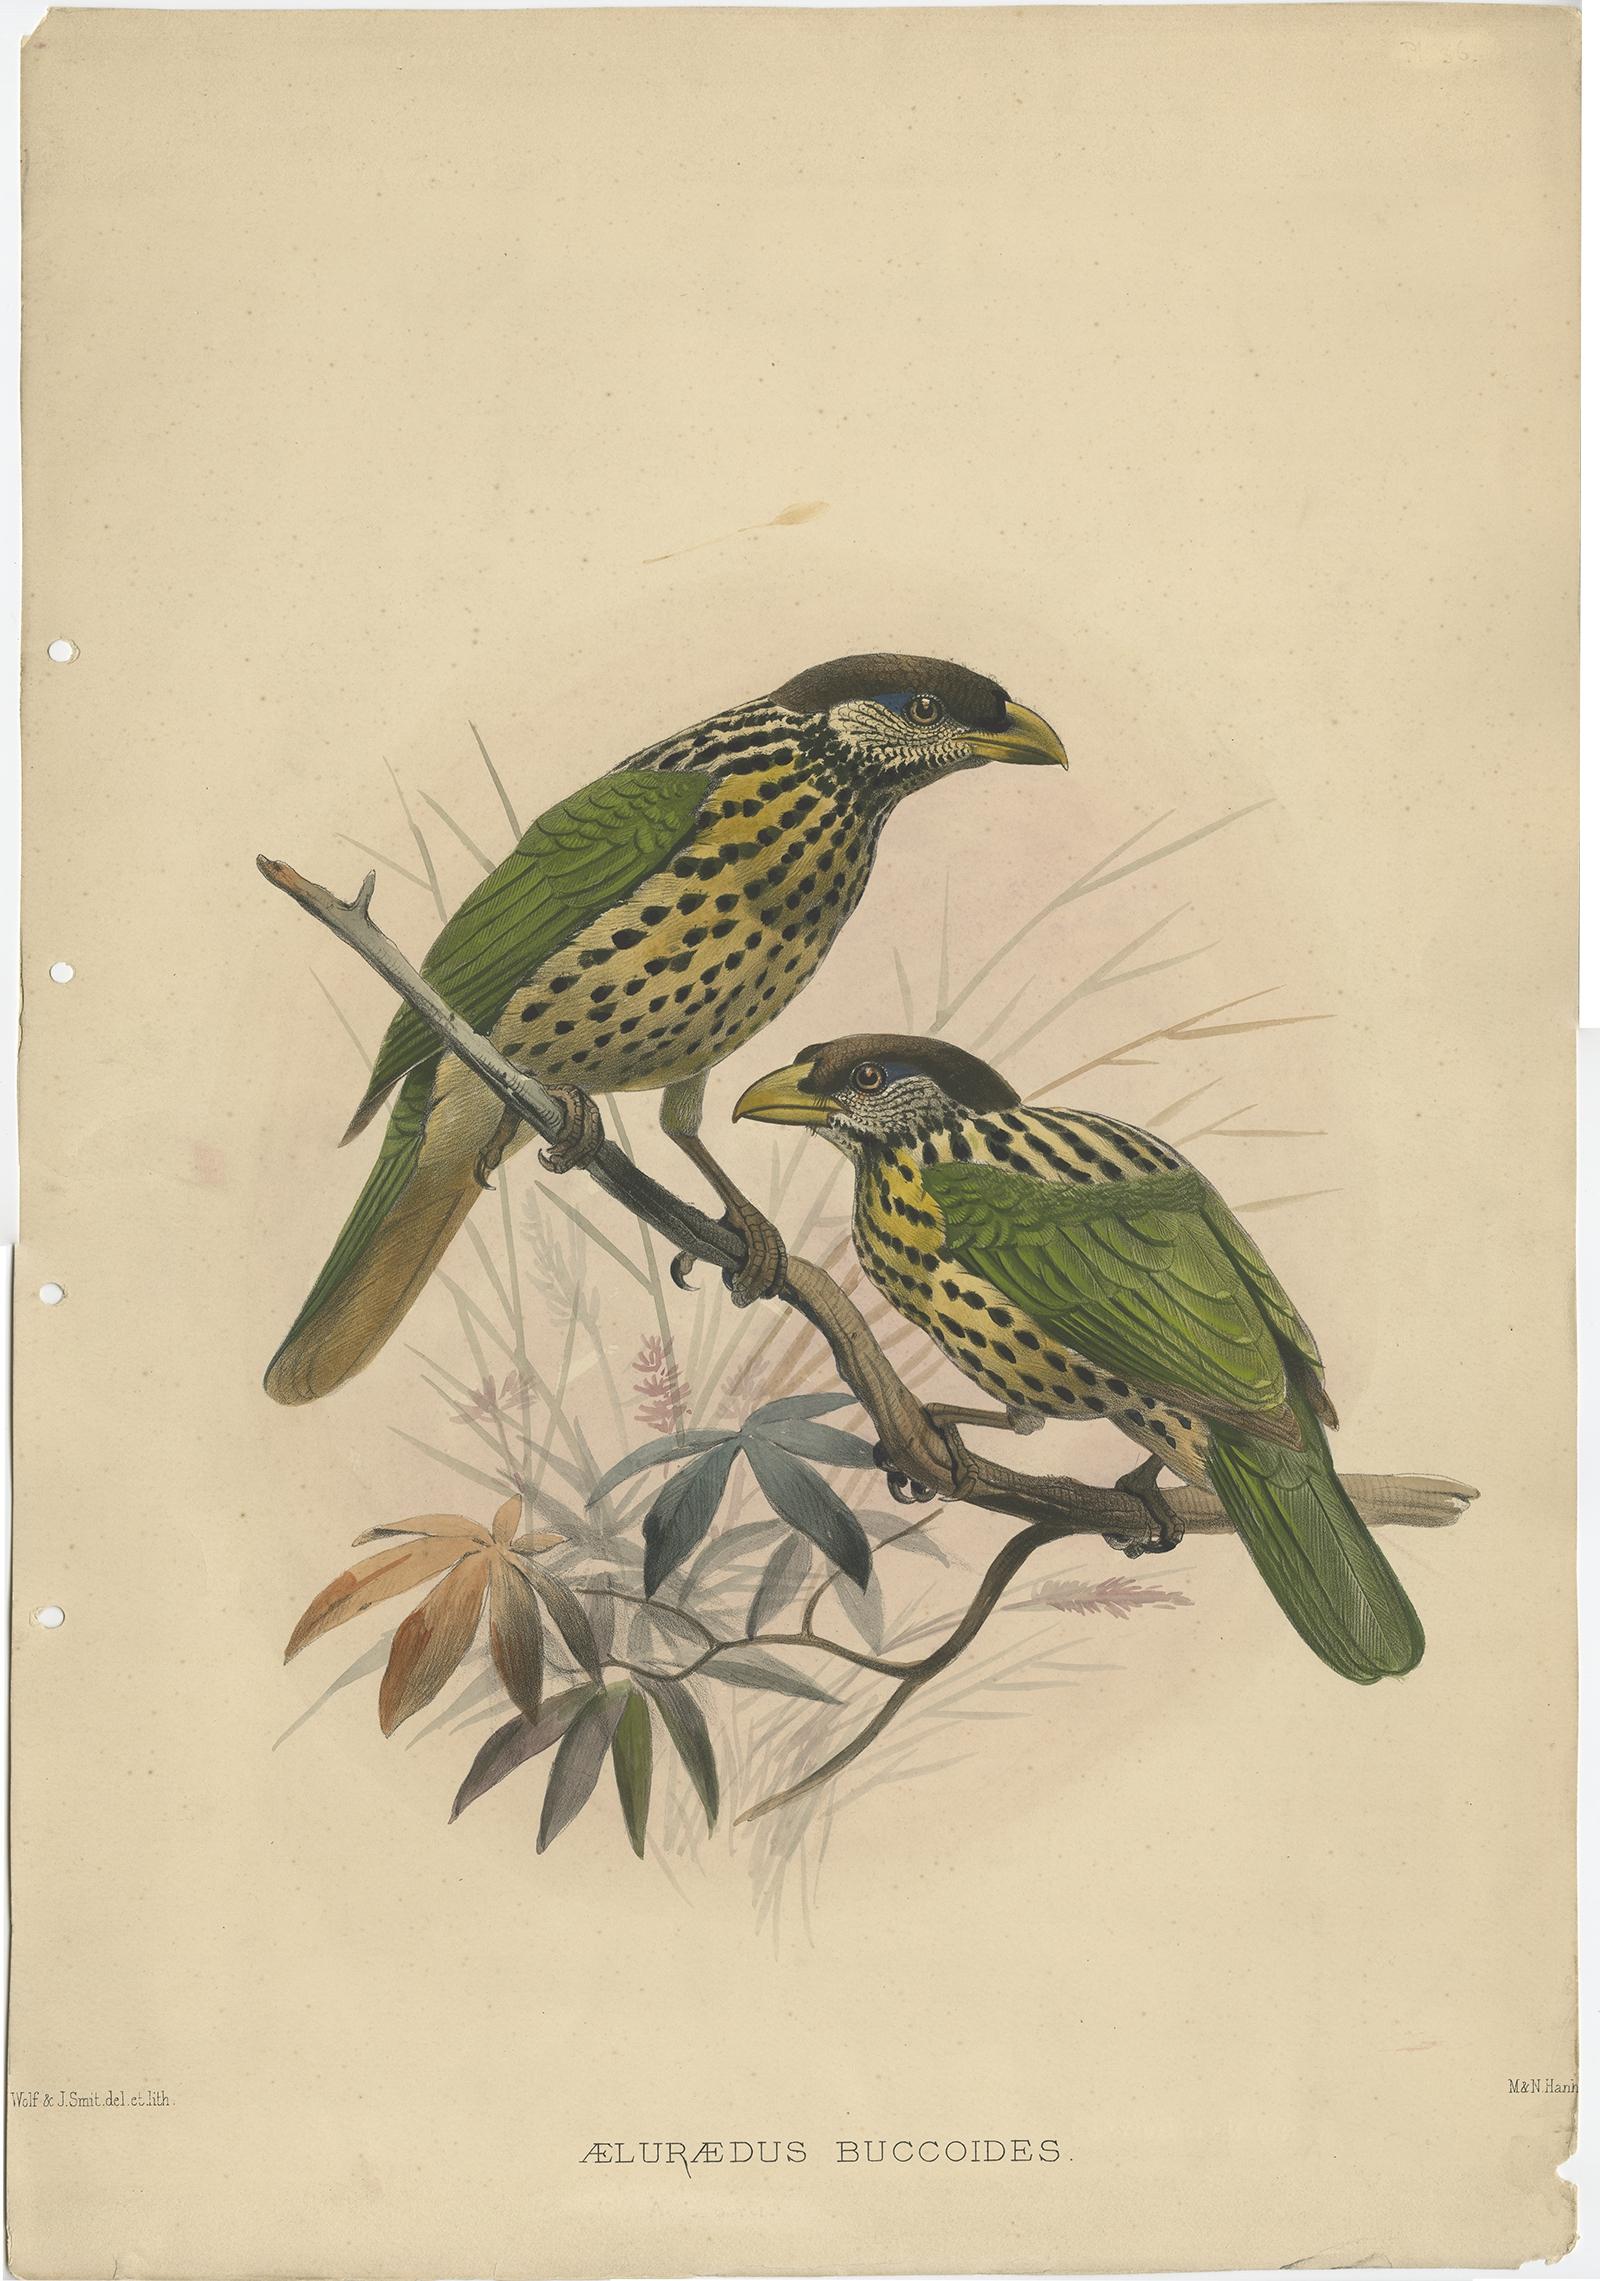 Antique bird print titled 'Ailuraedus Buccoides'. 

This print depicts the White-Eared Cat Bird. Originates from 'A Monograph of the Paradiseidae, or Birds of Paradise'. 

Artists and Engravers: Lithographed plate by J.Smith after J. Wolf.